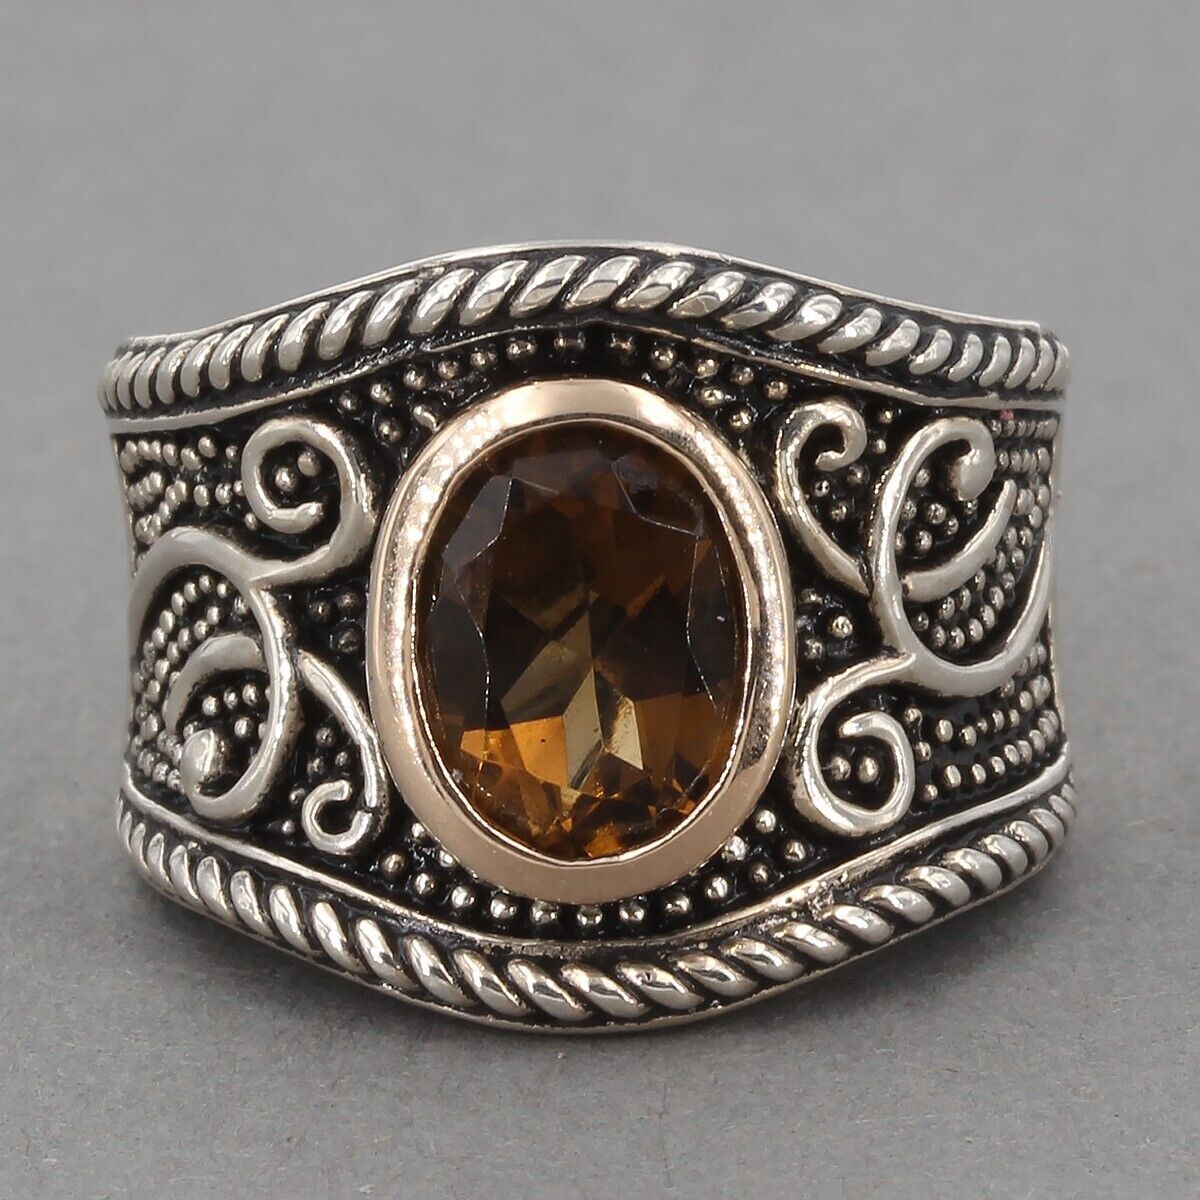 Oxidized Textured Sterling Silver & 14K Gold Smoky Quartz Band Ring Size 5.75